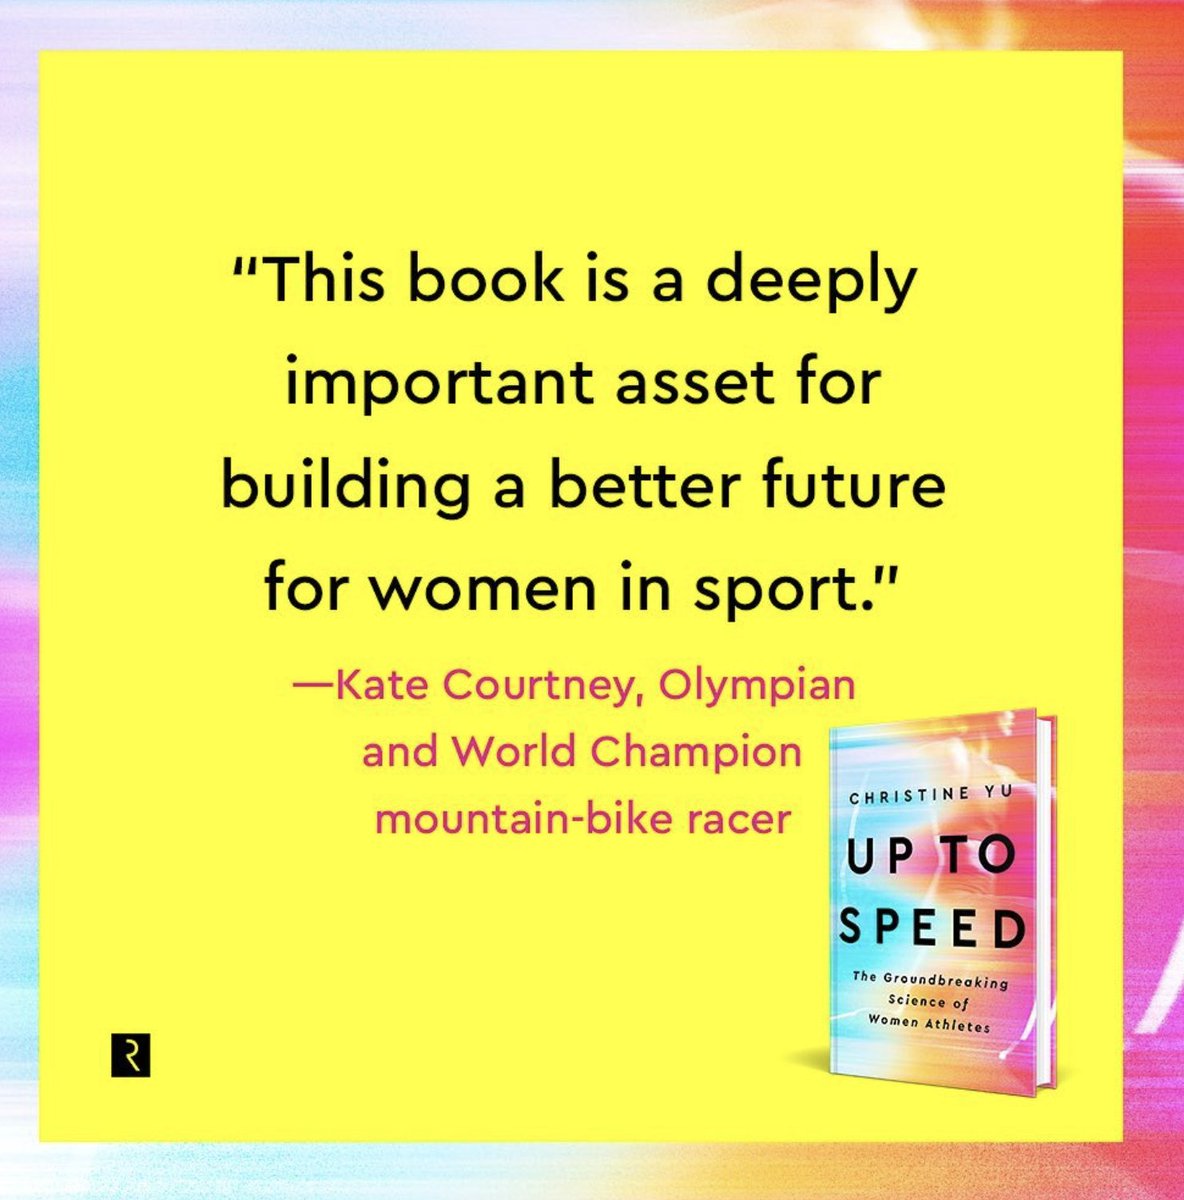 Tomorrow Night LIVE here on X ✍️ Producing 🎬🎤🎬 #HealthStorytelling Join world-renowned journalist @MarynMck for a great discussion w/ Christine Yu @cyu888 about her book 🏃‍♀️ UP TO SPEED🏃‍♀️‍➡️ The Groundbreaking Science of Women Athletes. #BooksWorthReading ⬇️ ⬇️